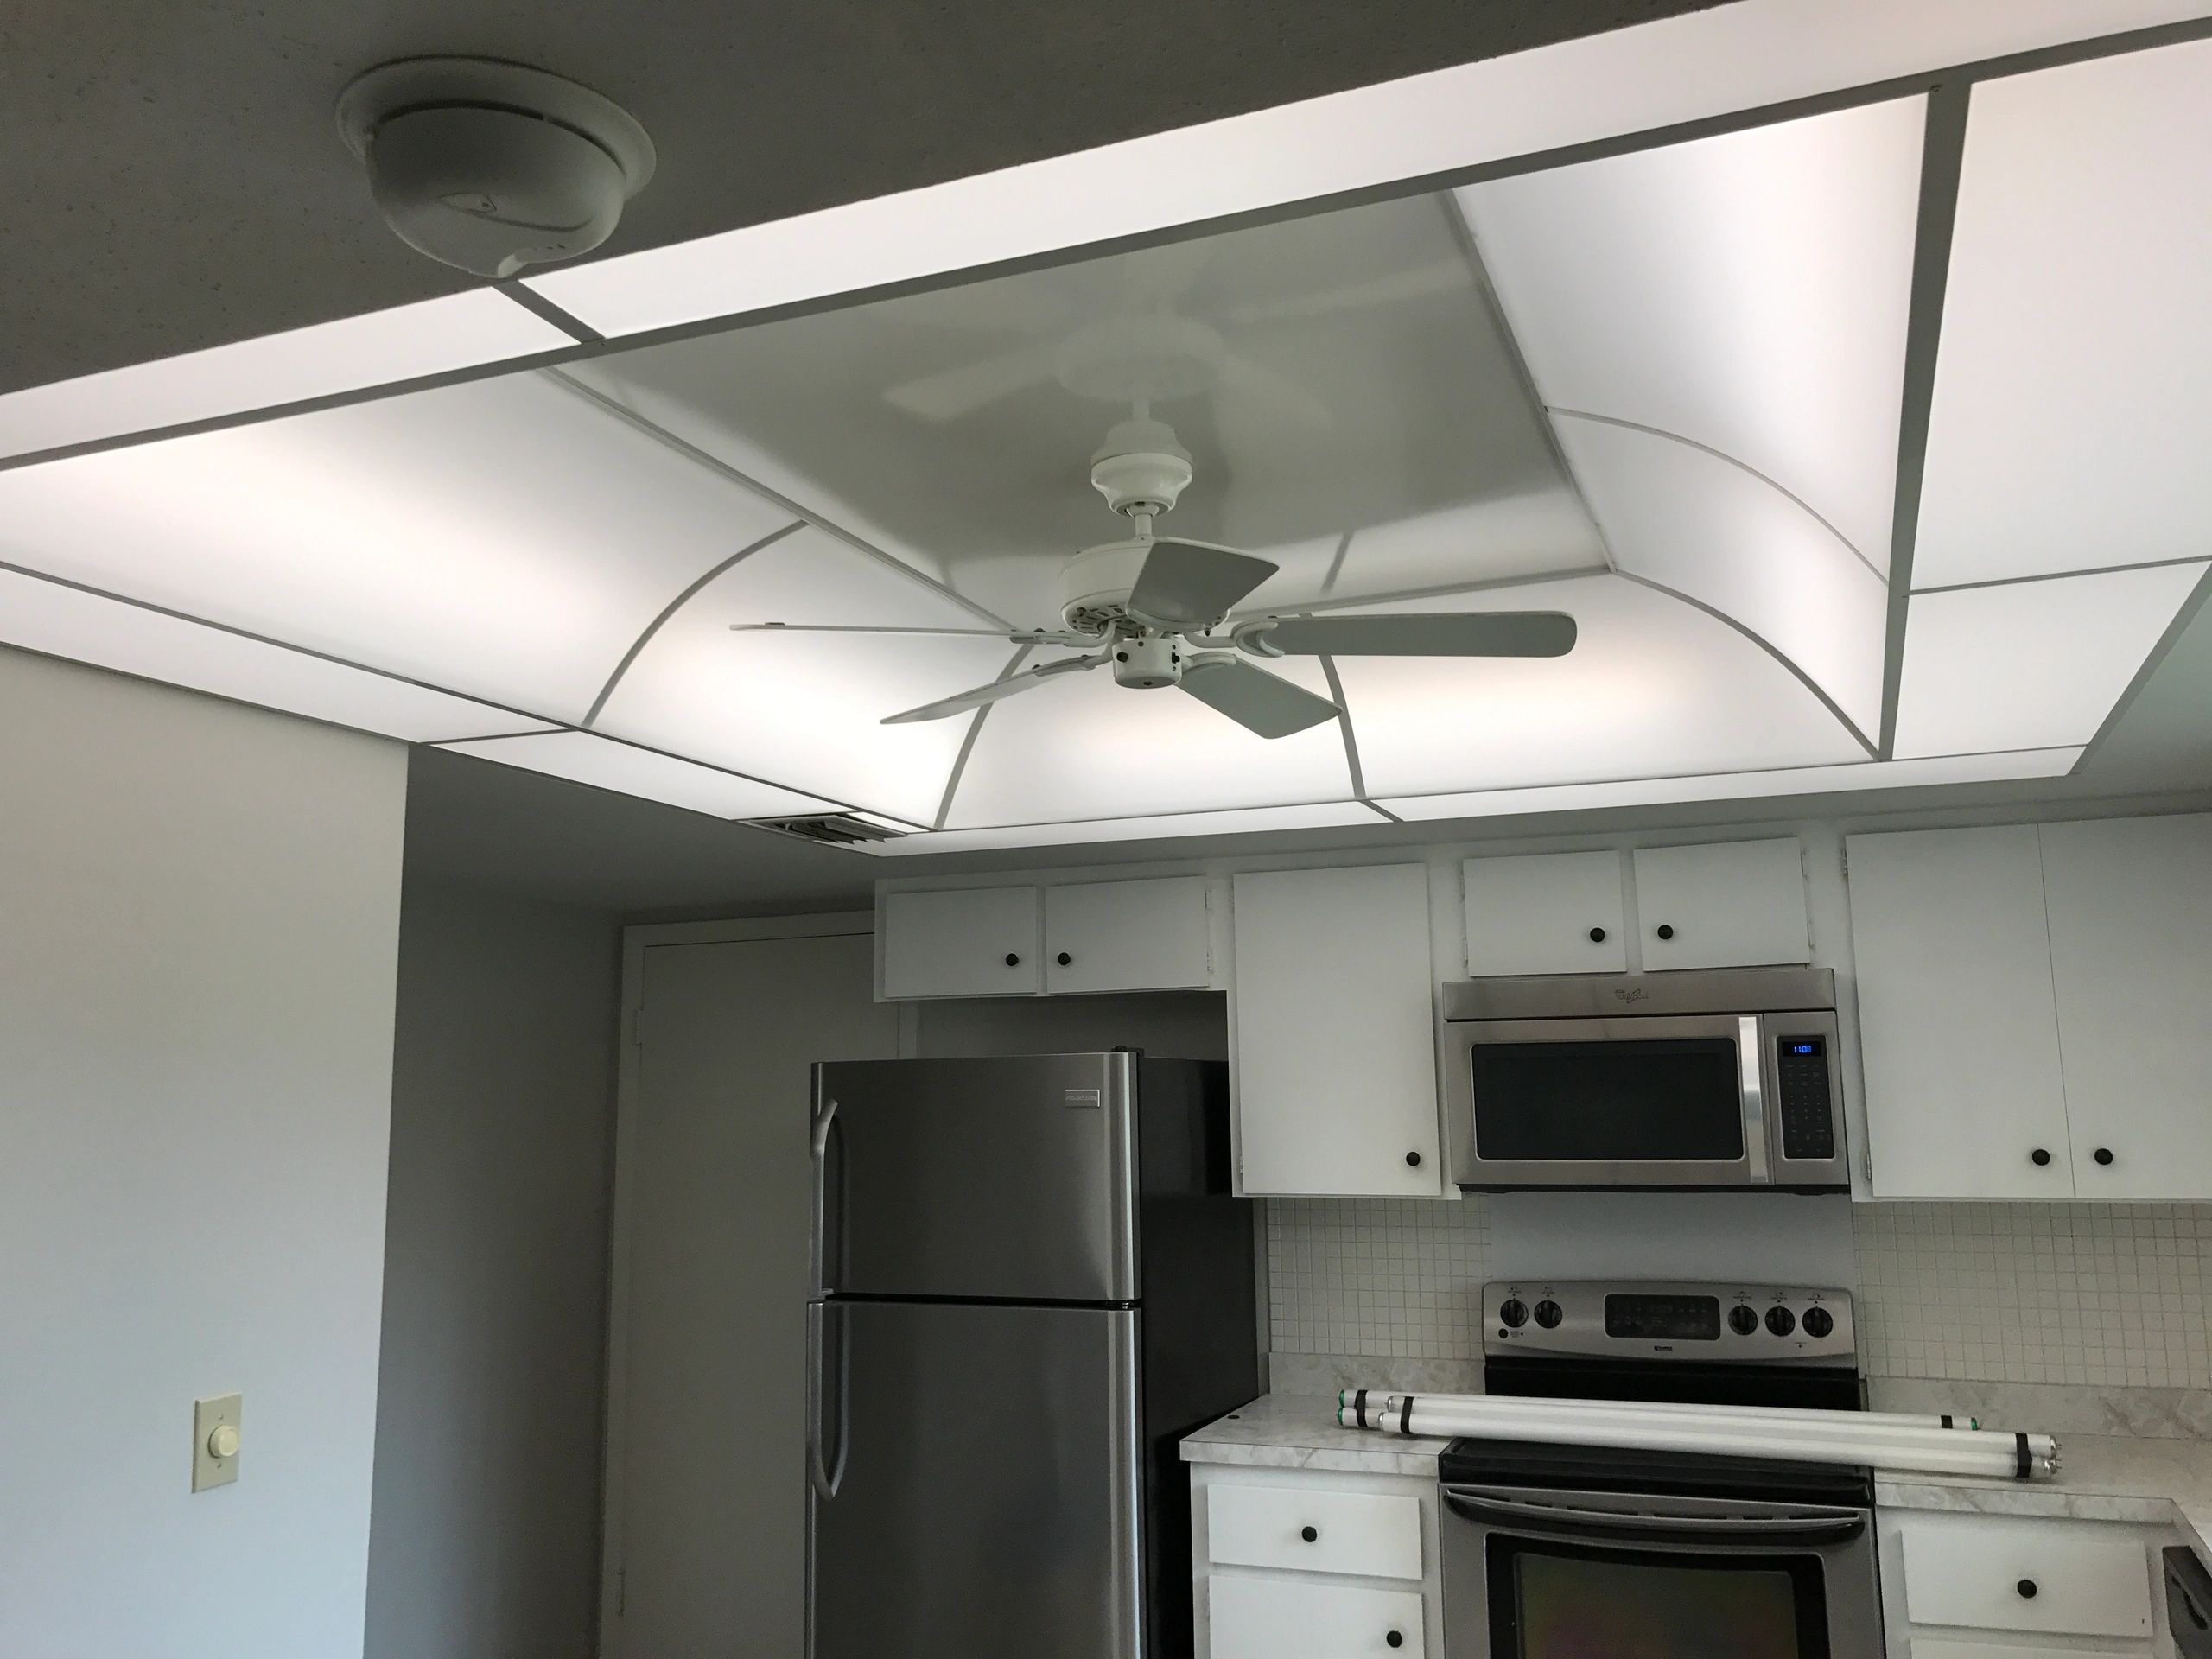 kitchen dome ceiling lighting